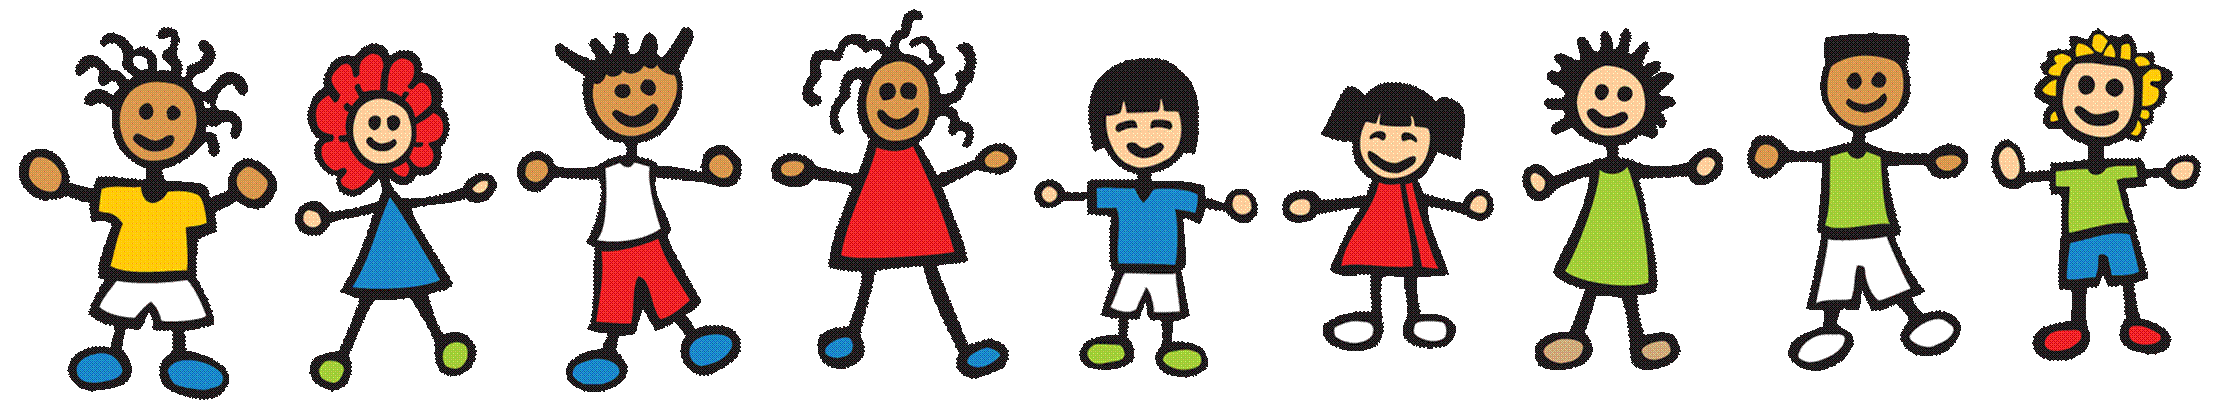 Png hd pictures of. Torch clipart kid leader